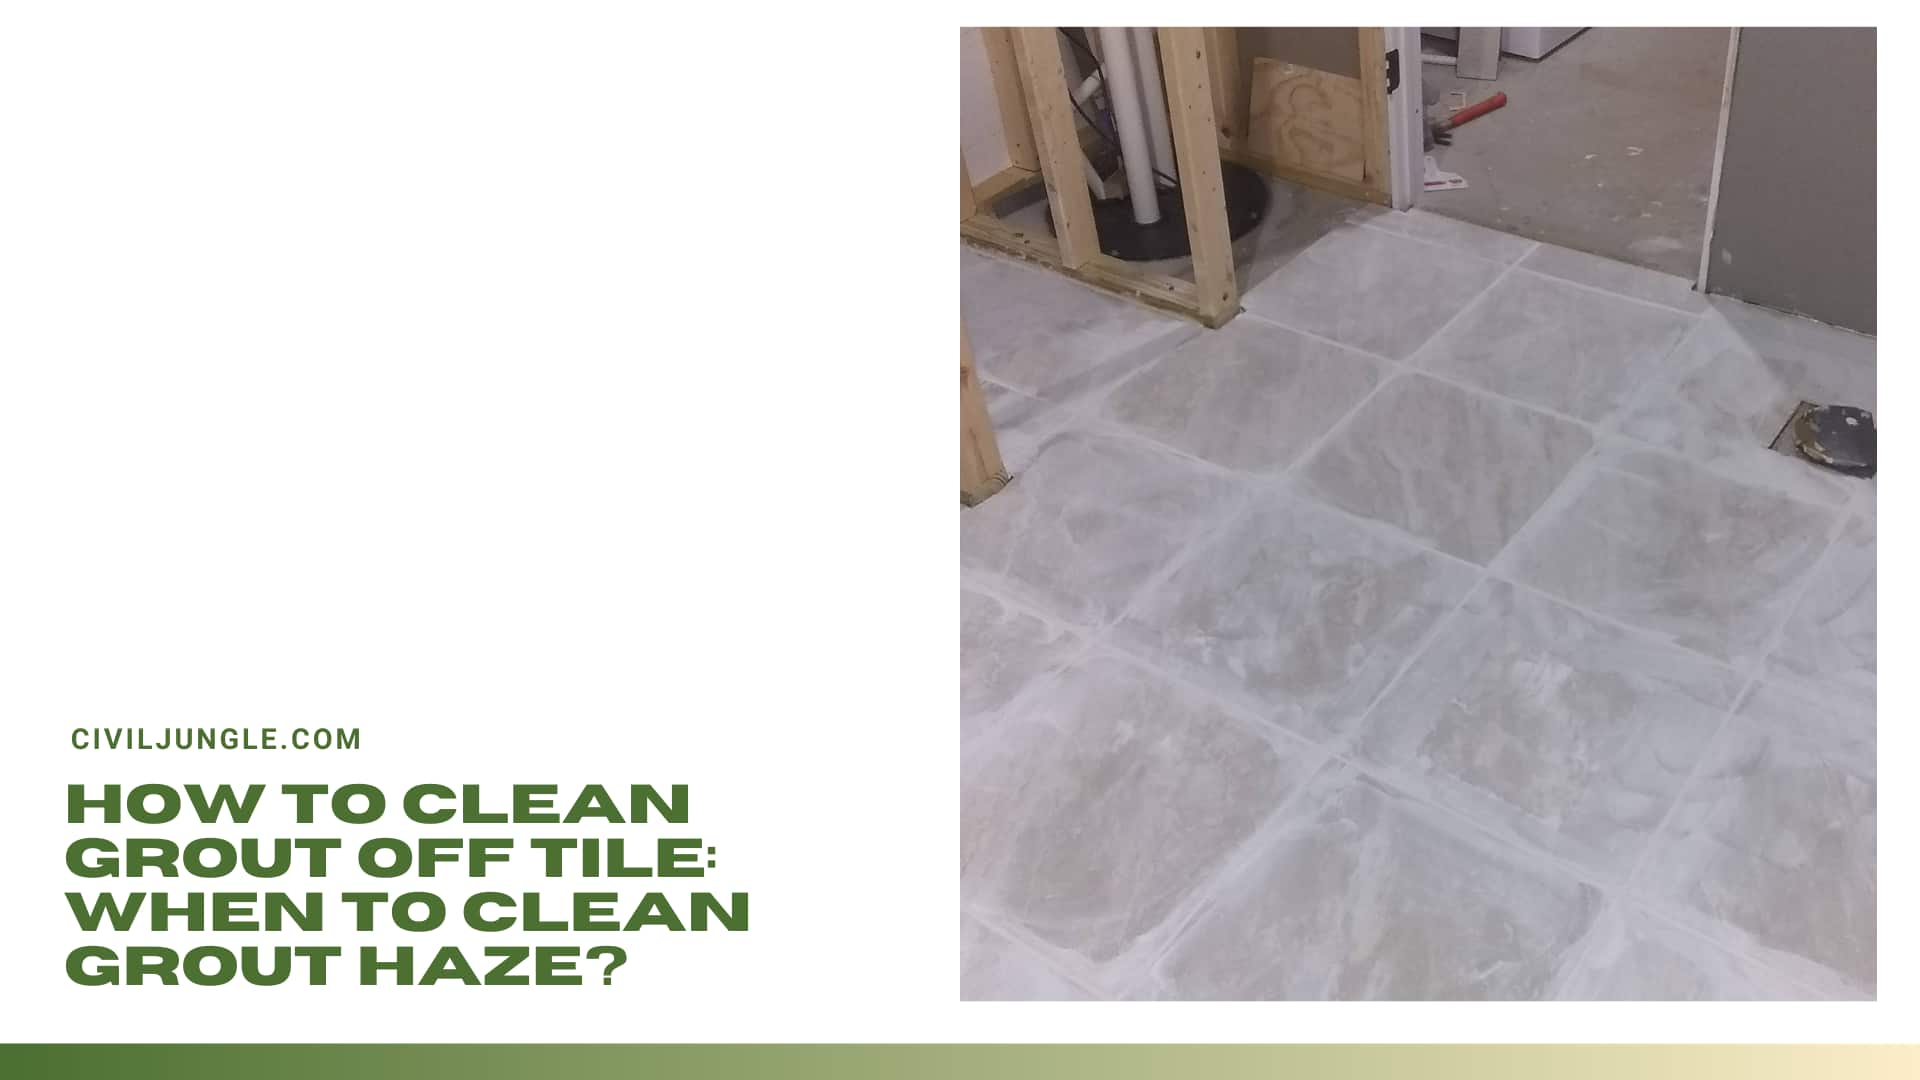 How to Clean Grout Off Tile: When to Clean Grout Haze?